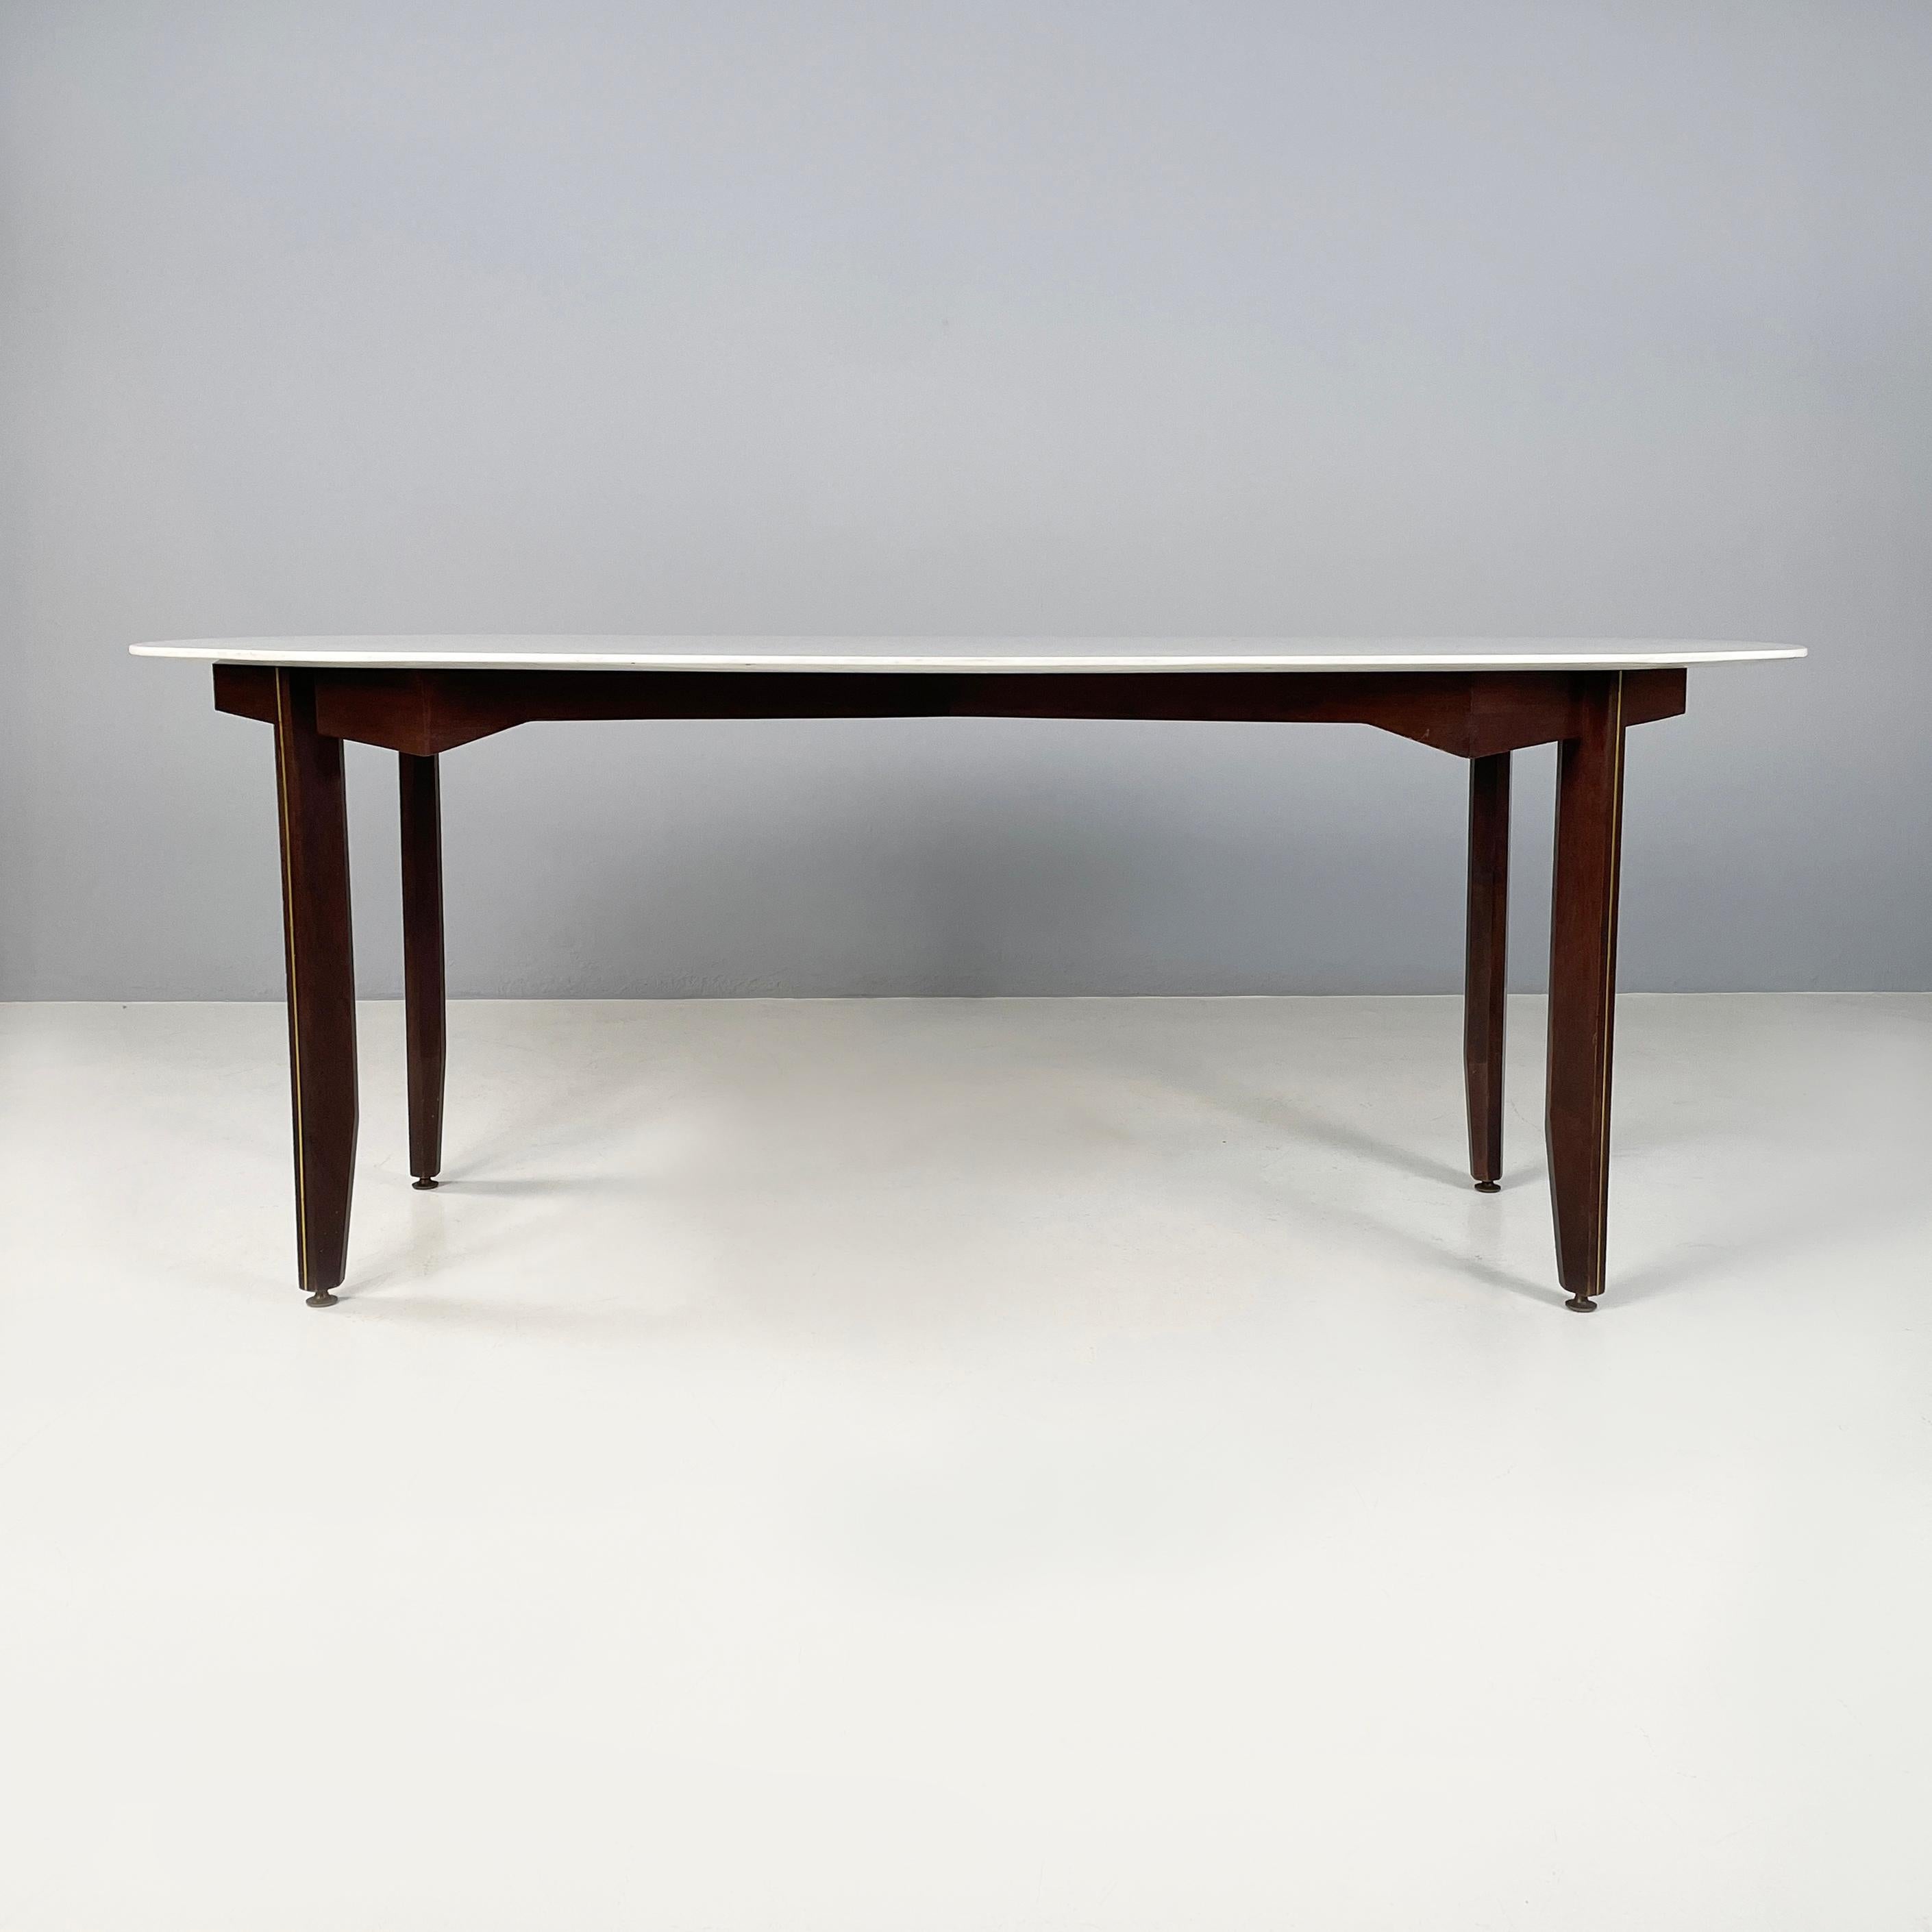 Italian mid-century modern Dining table in marble, wood and bass, 1960s
Dining table with oval top in white Carrara marble. The structure on which the top rests is an 8 shape in dark wood. The square wooden legs have brass rod details. Round brass